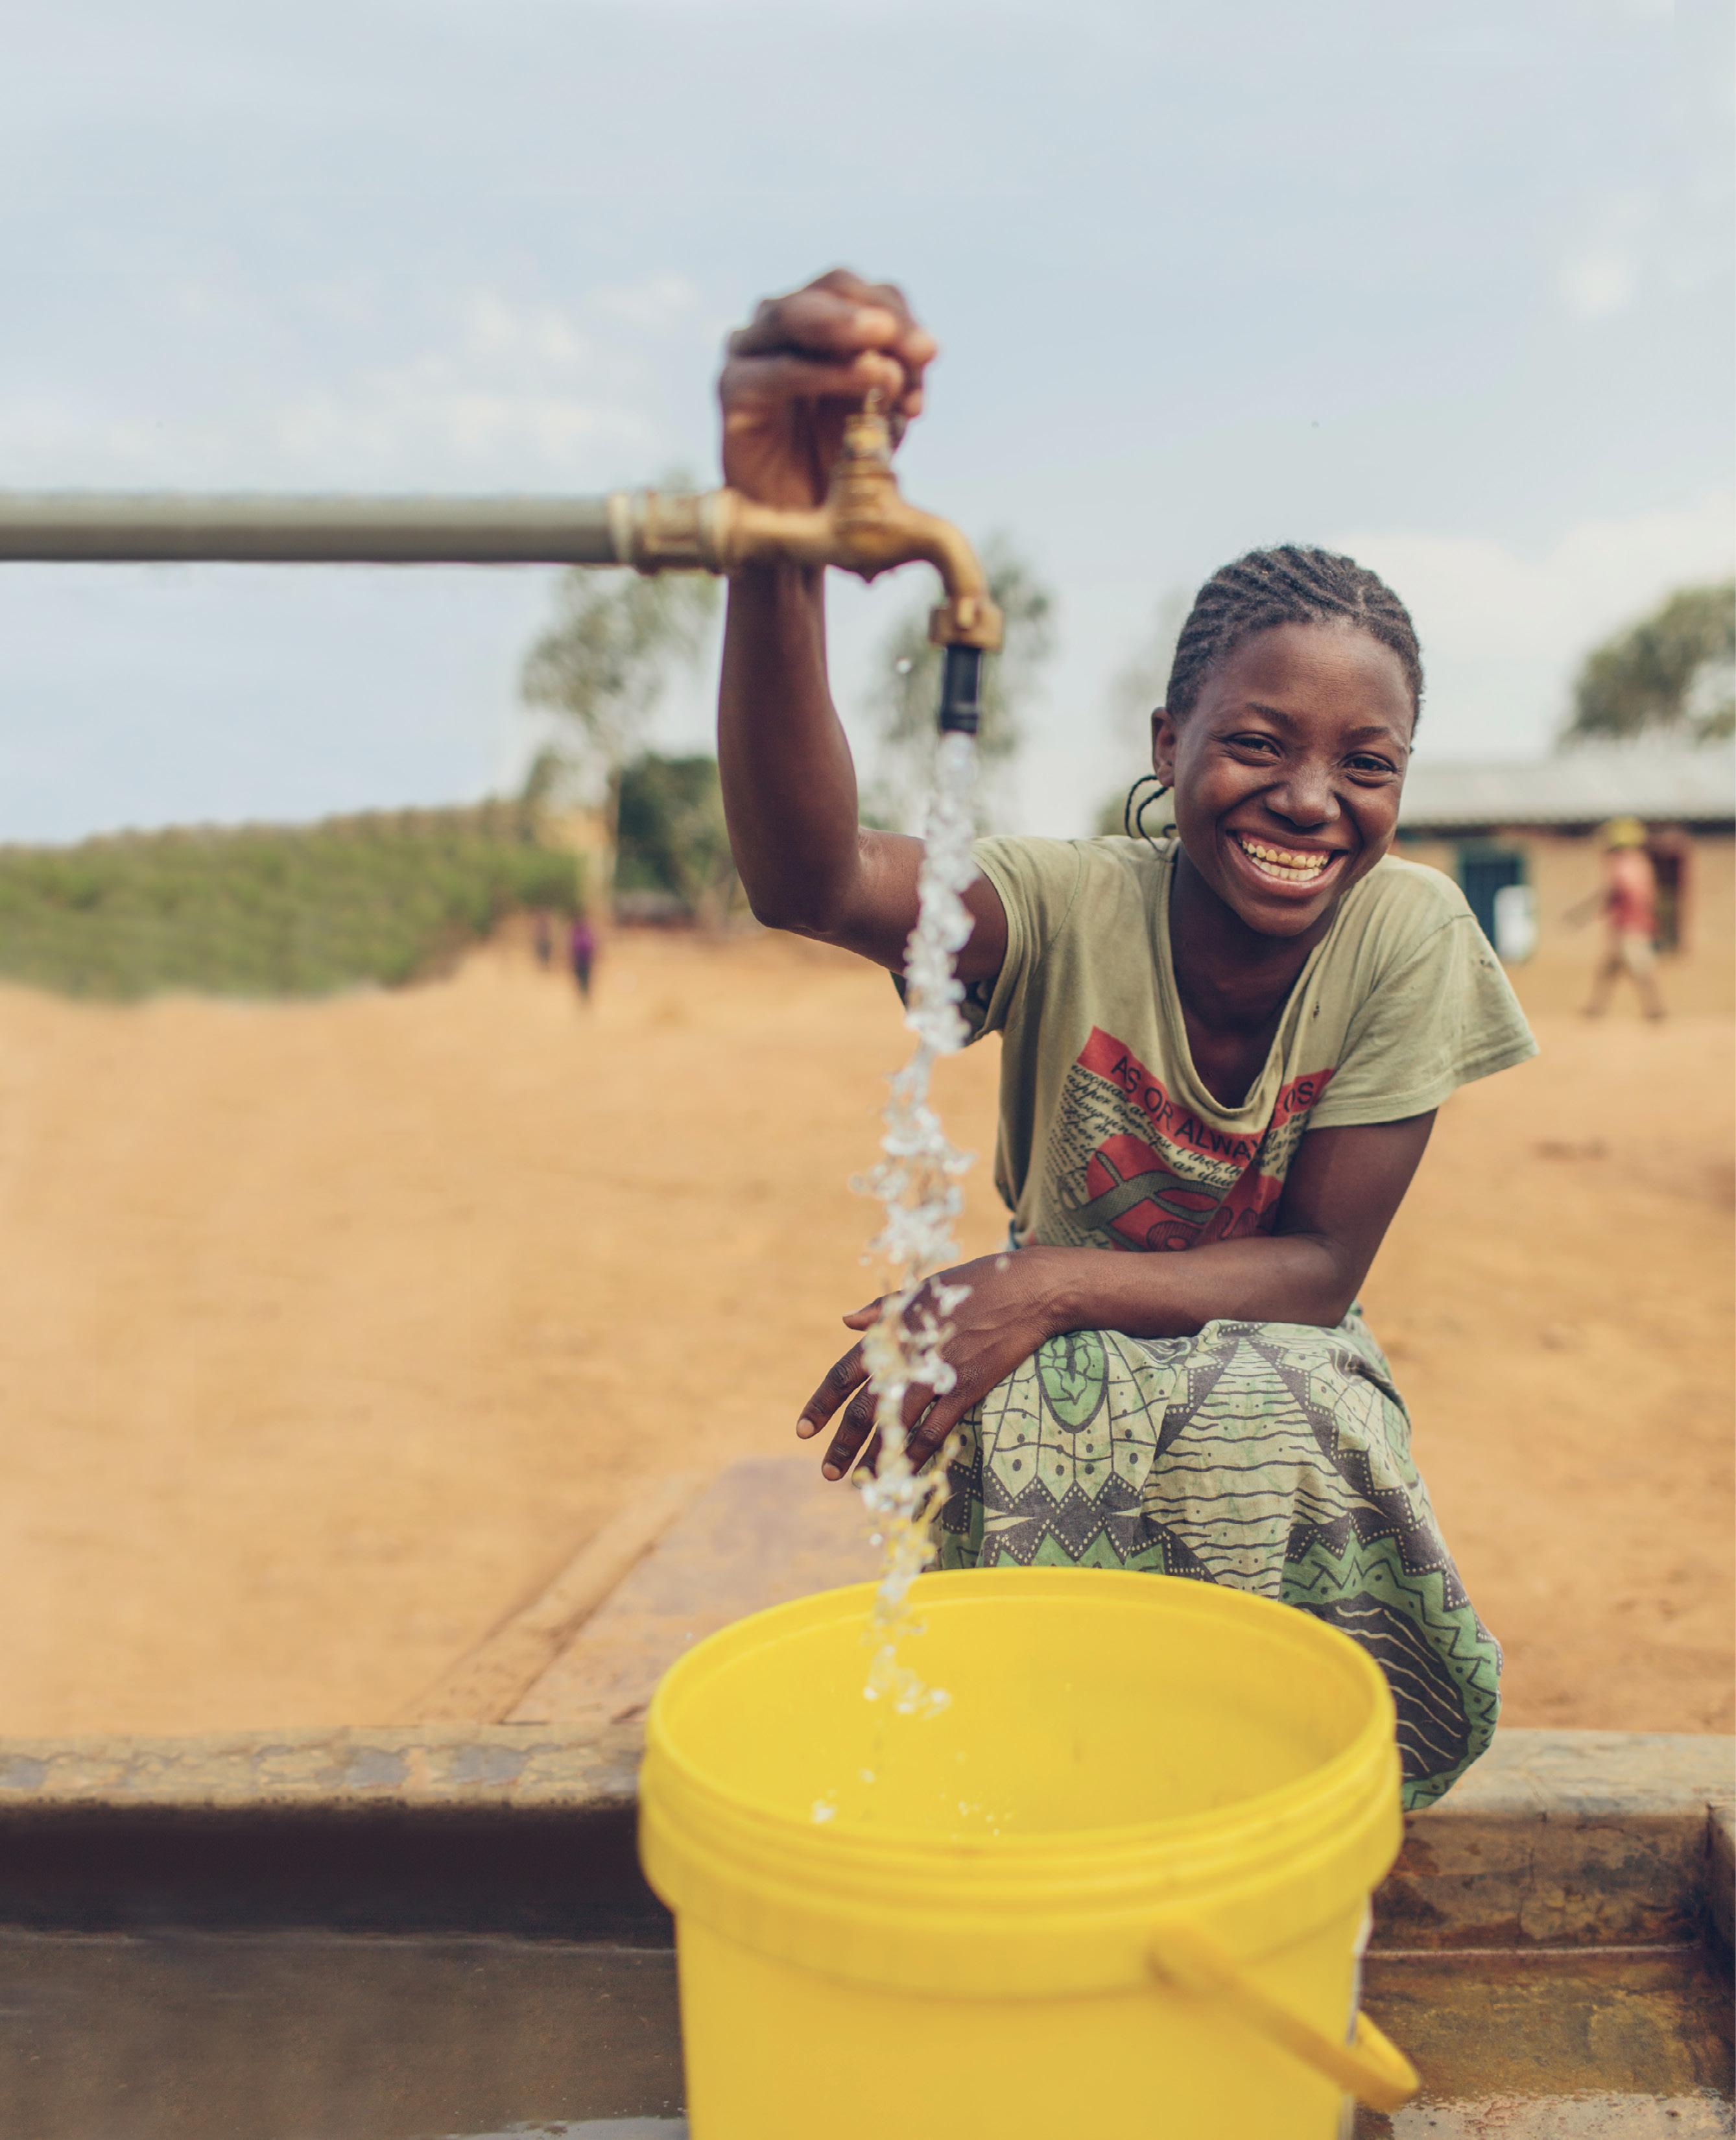 In 2009, Water Mission installed tap stands in this Malawi community after learning that children left home just before midnight each night to get in line at the nearest water source in order to have water the following day.